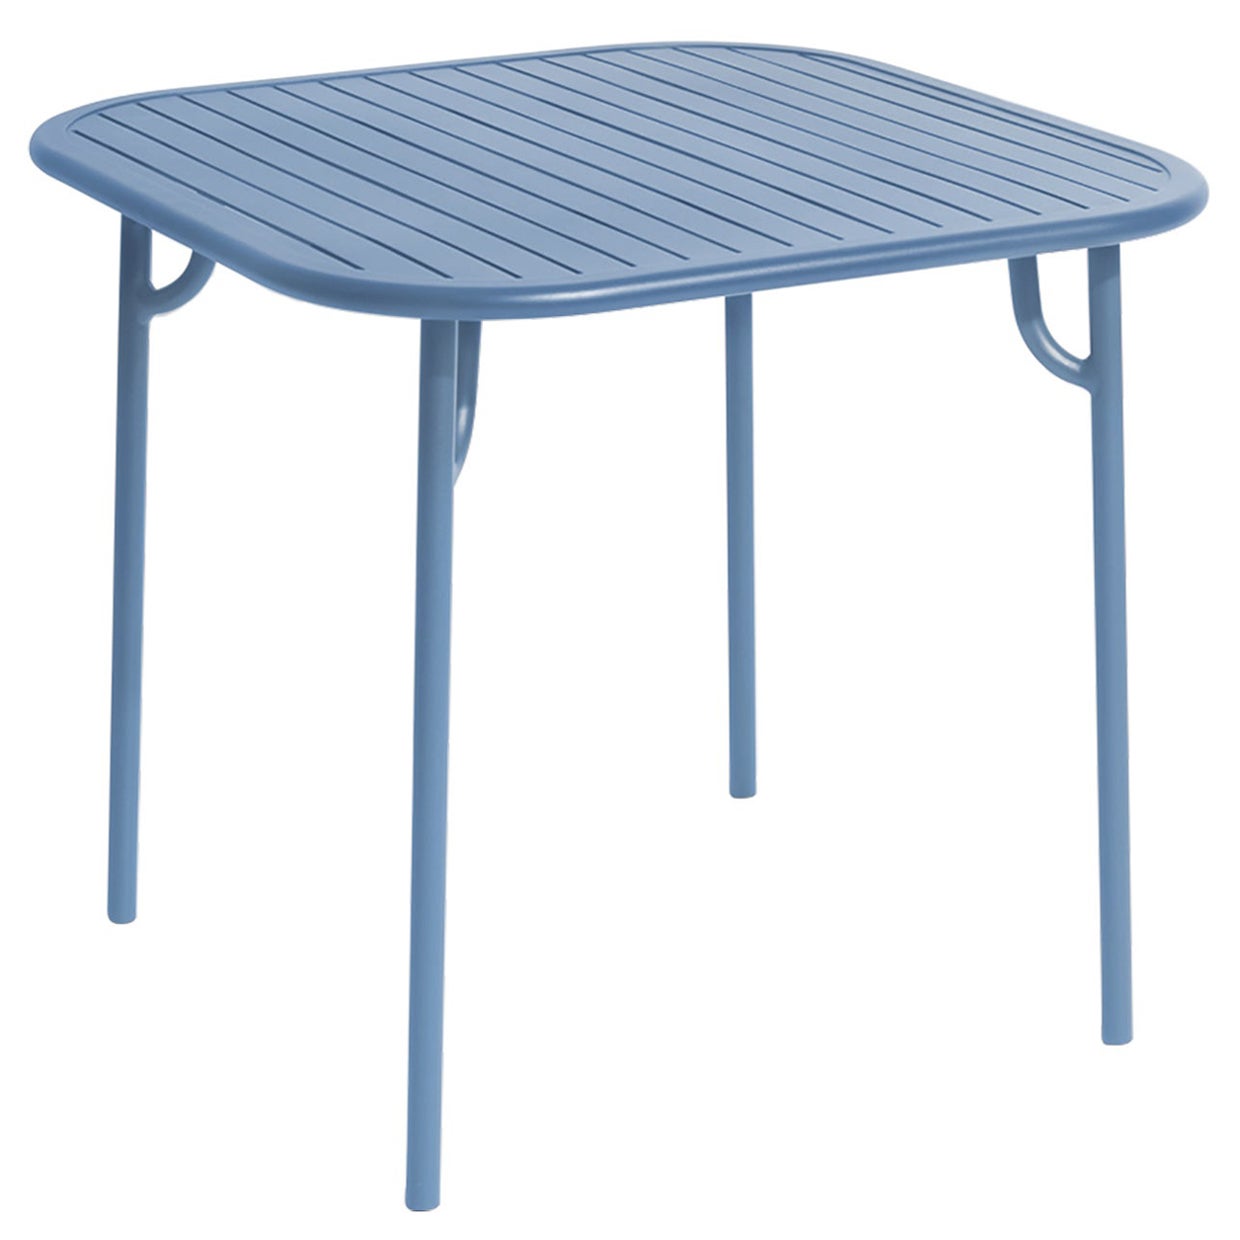 Petite Friture Week-End Square Dining Table in Azure Blue Aluminium with Slats For Sale